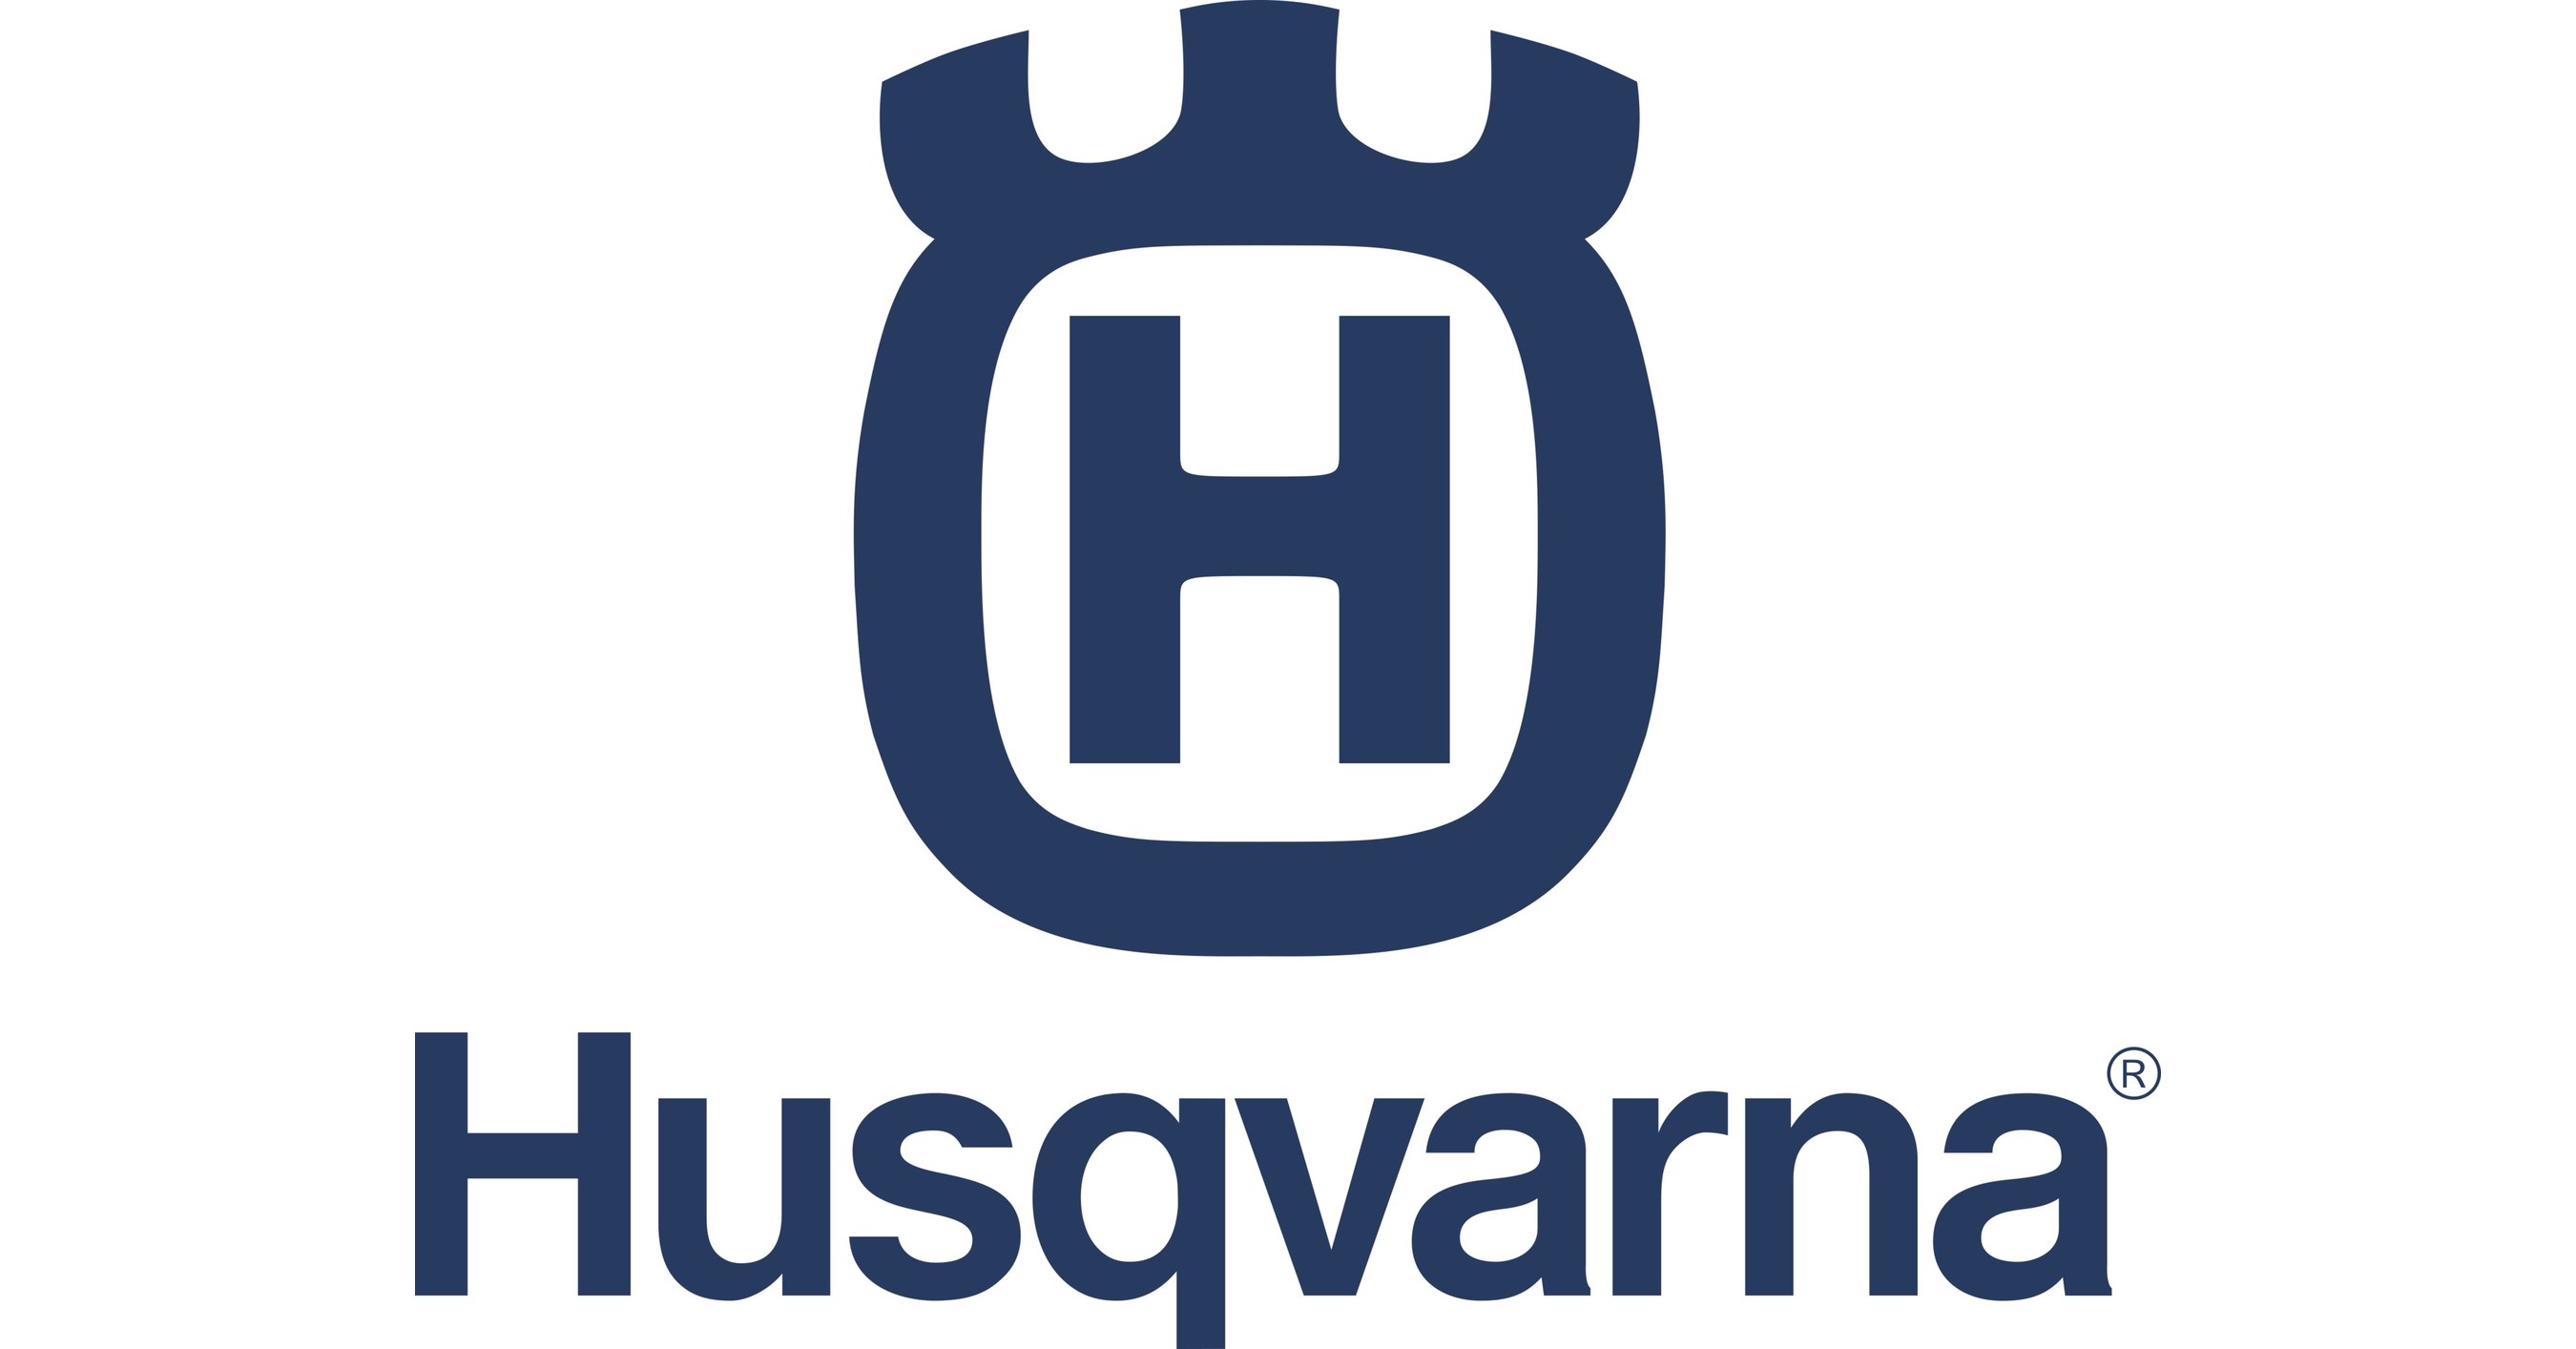 Husqvarna Announces New Leadership Strategy to Drive North American Business Forward